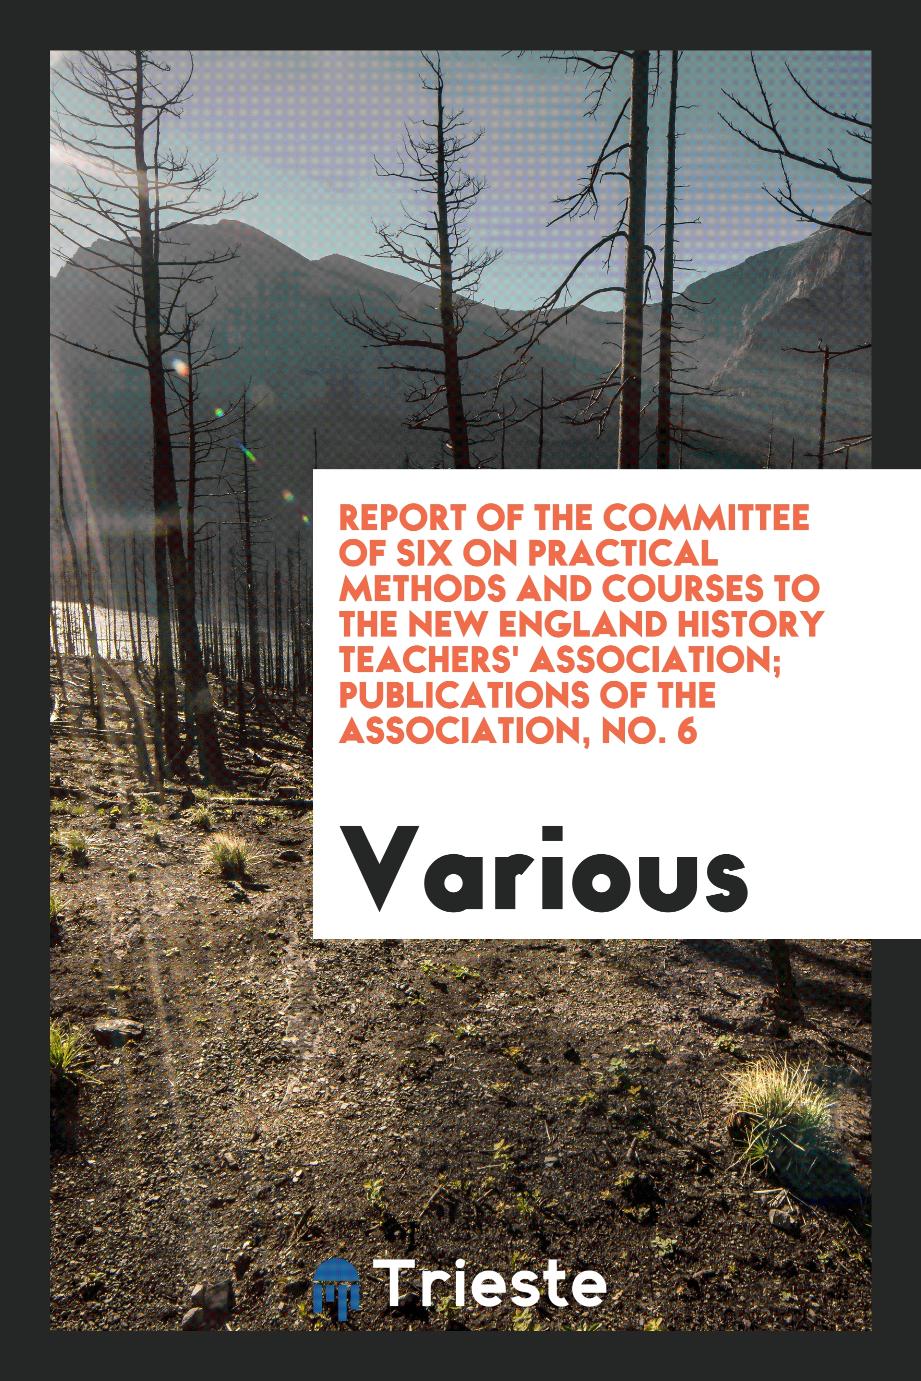 Report of the Committee of Six on Practical Methods and Courses to the New England History Teachers' Association; Publications of the Association, No. 6